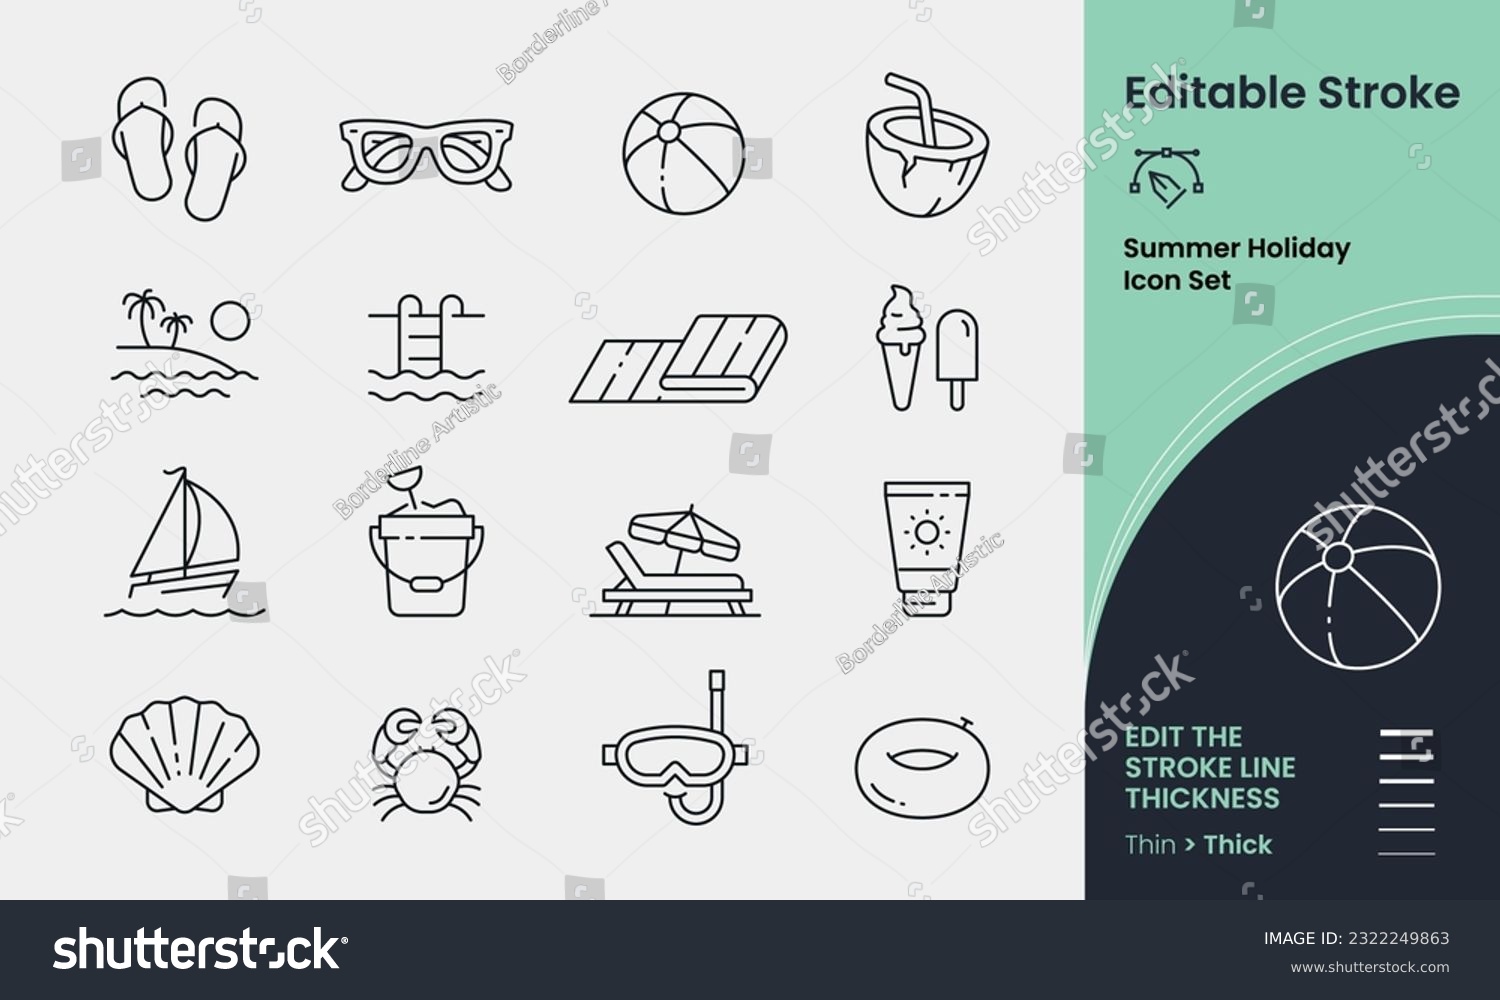 SVG of Summer Holiday Vacation Icon collection containing 16 editable stroke icons. Perfect for logos, stats and infographics. Edit the thickness of the line in any vector capable app. svg